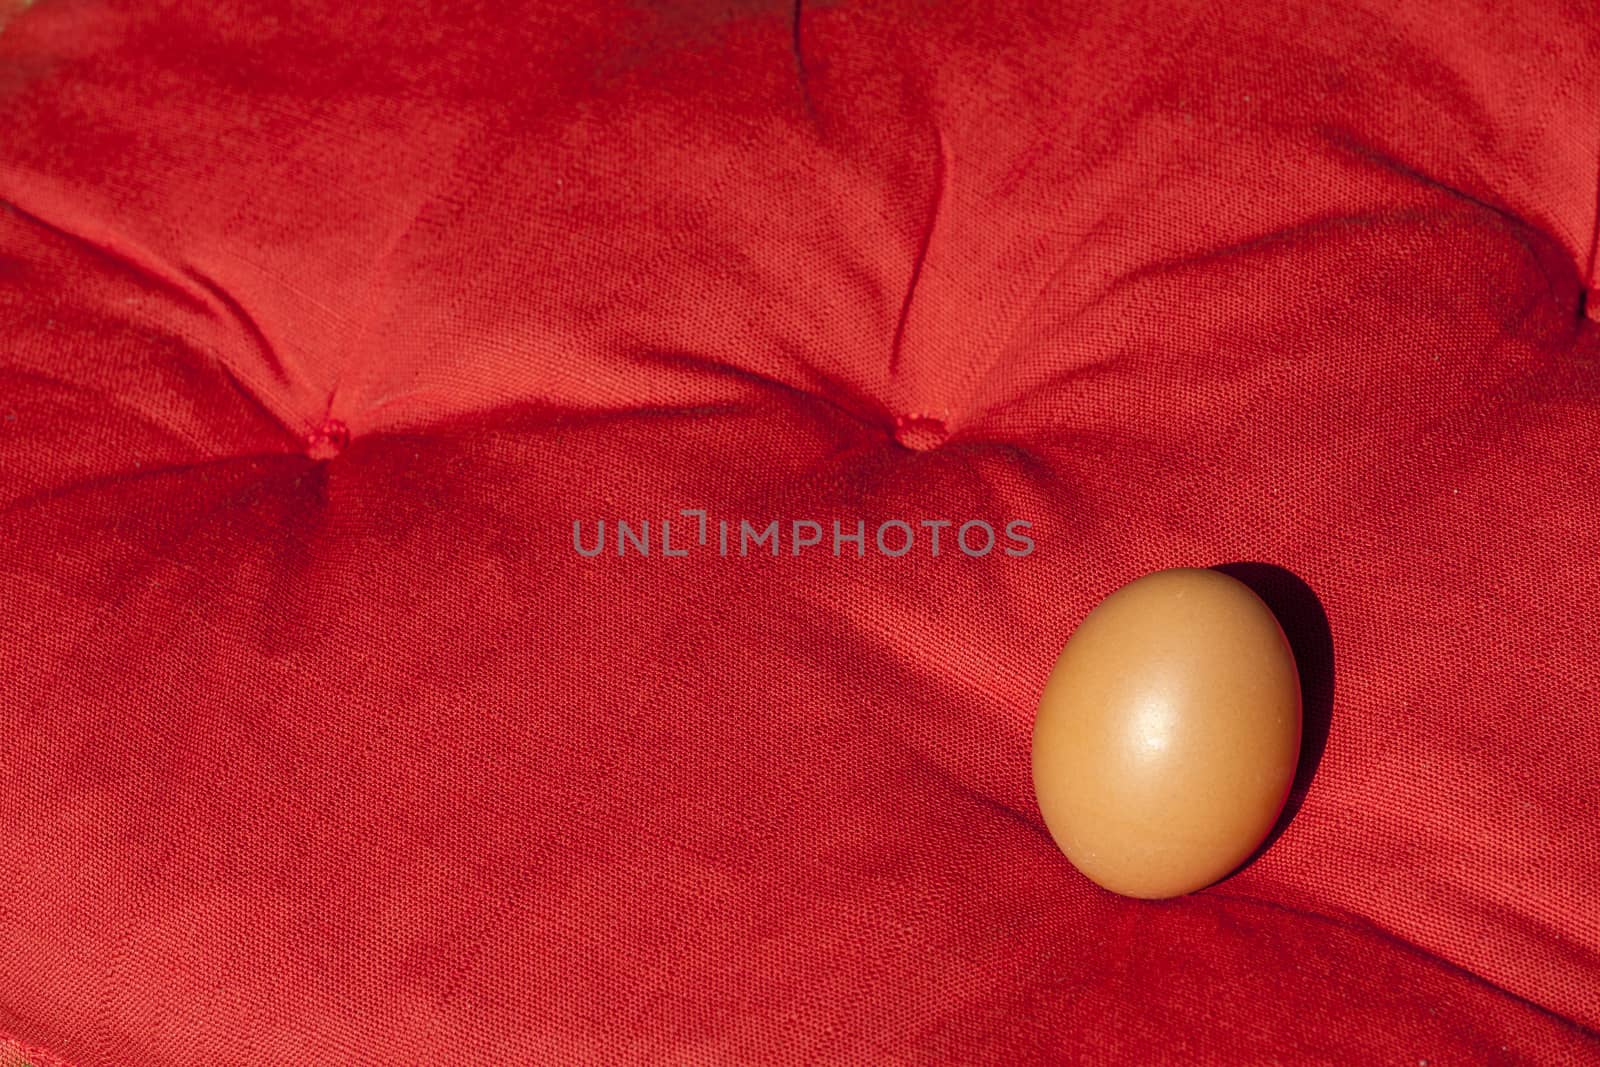 Egg on a red pillow under the sun in summertime